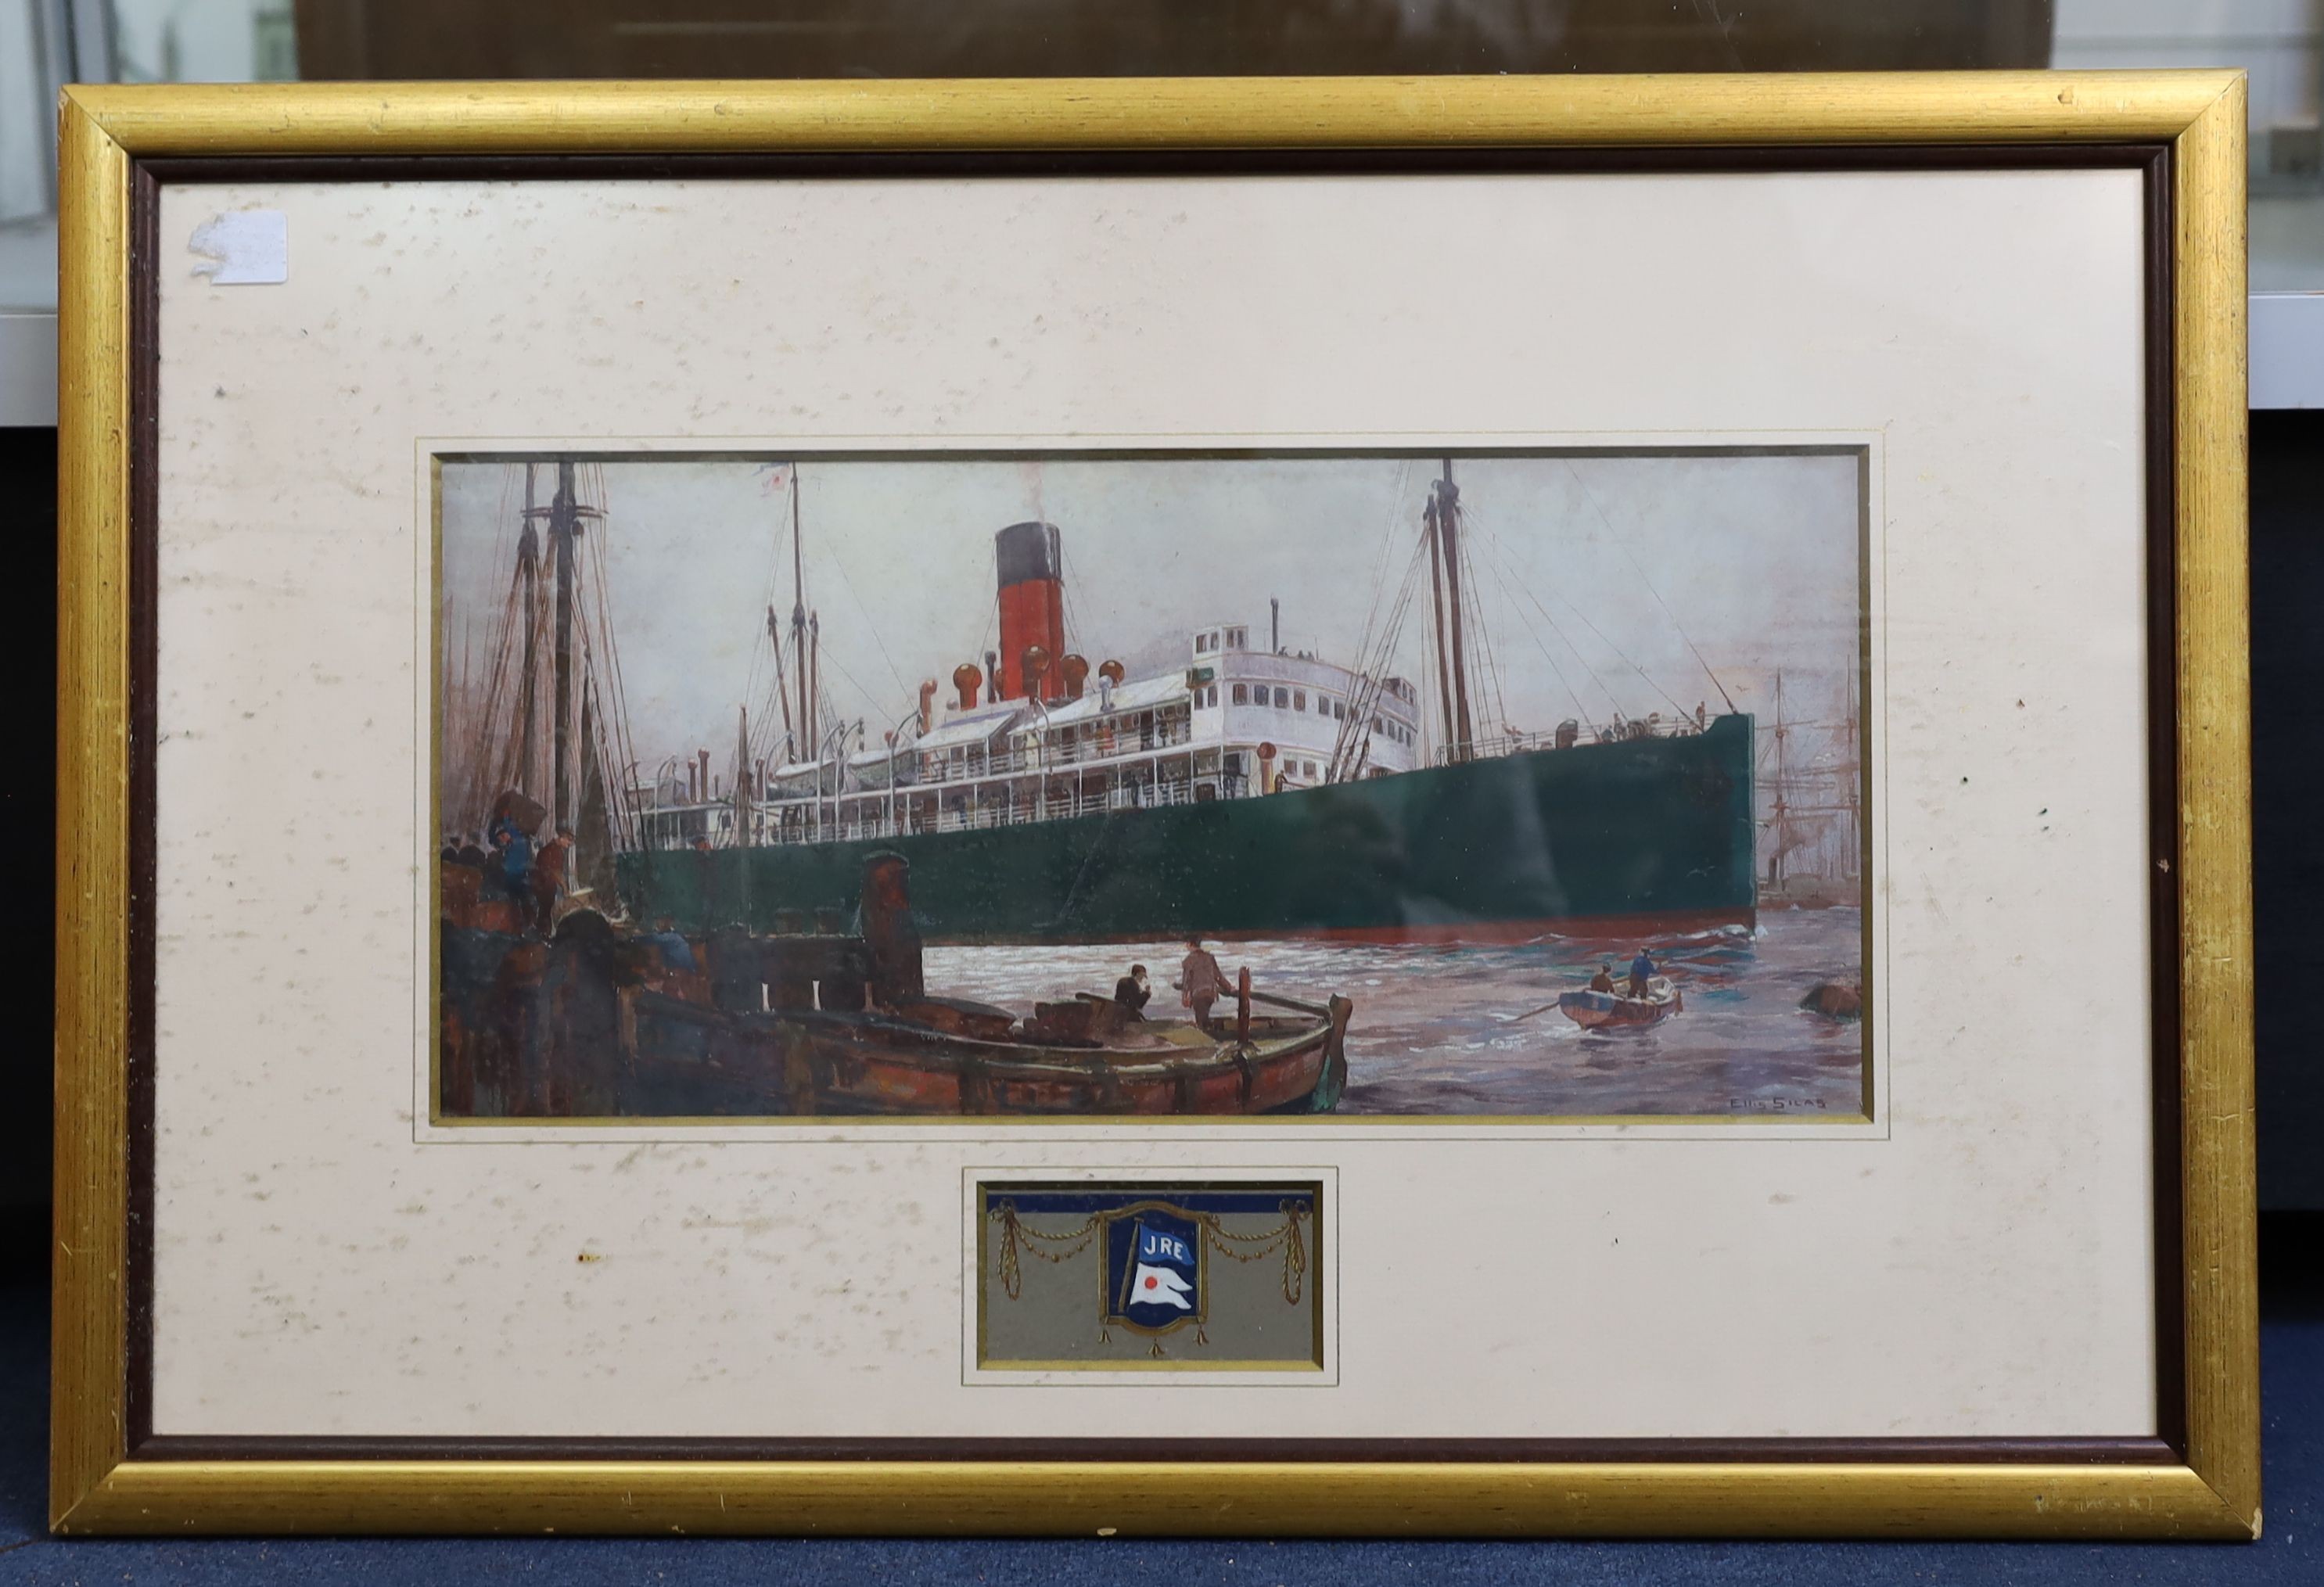 Ellis Silas (1885-1972), Liner entering harbour with remarque sketch of a coat of arms initialled JRE, gouache and watercolour, 23 x 49cm